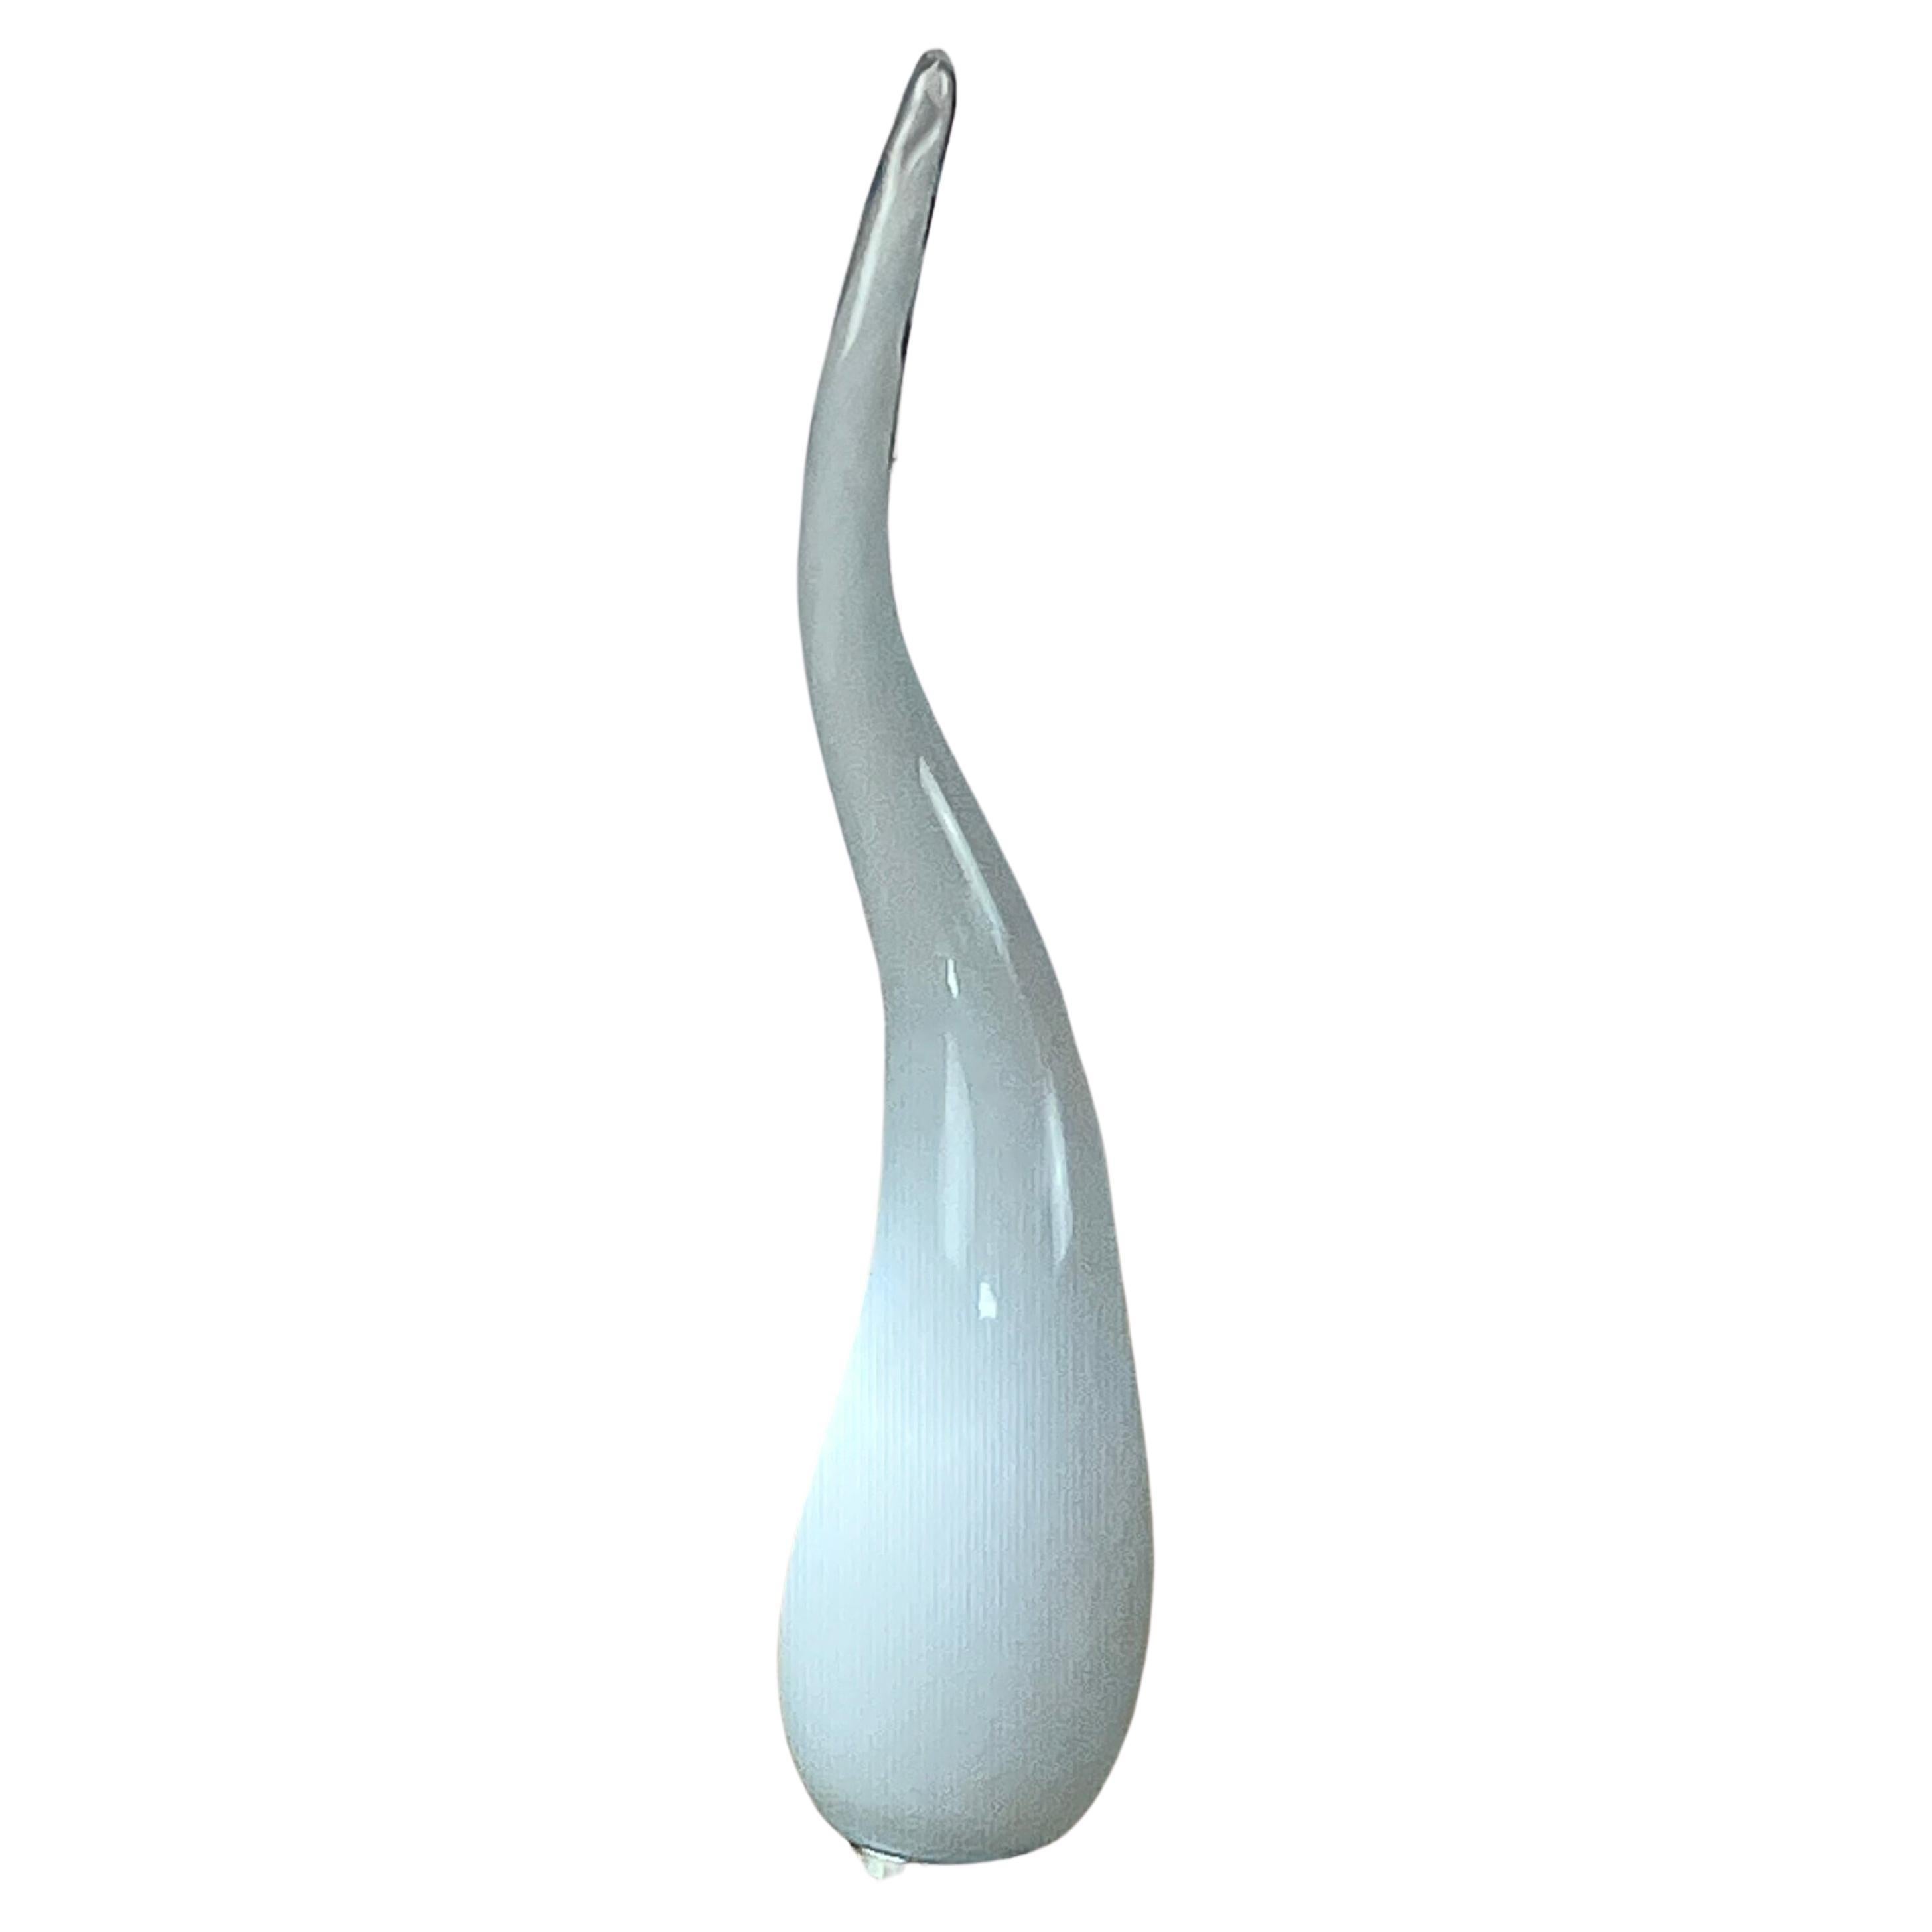 Murano glass table lamp, Italy, 1990s
It is a lucky horn in milky glass. Crystal base. Integral and working.